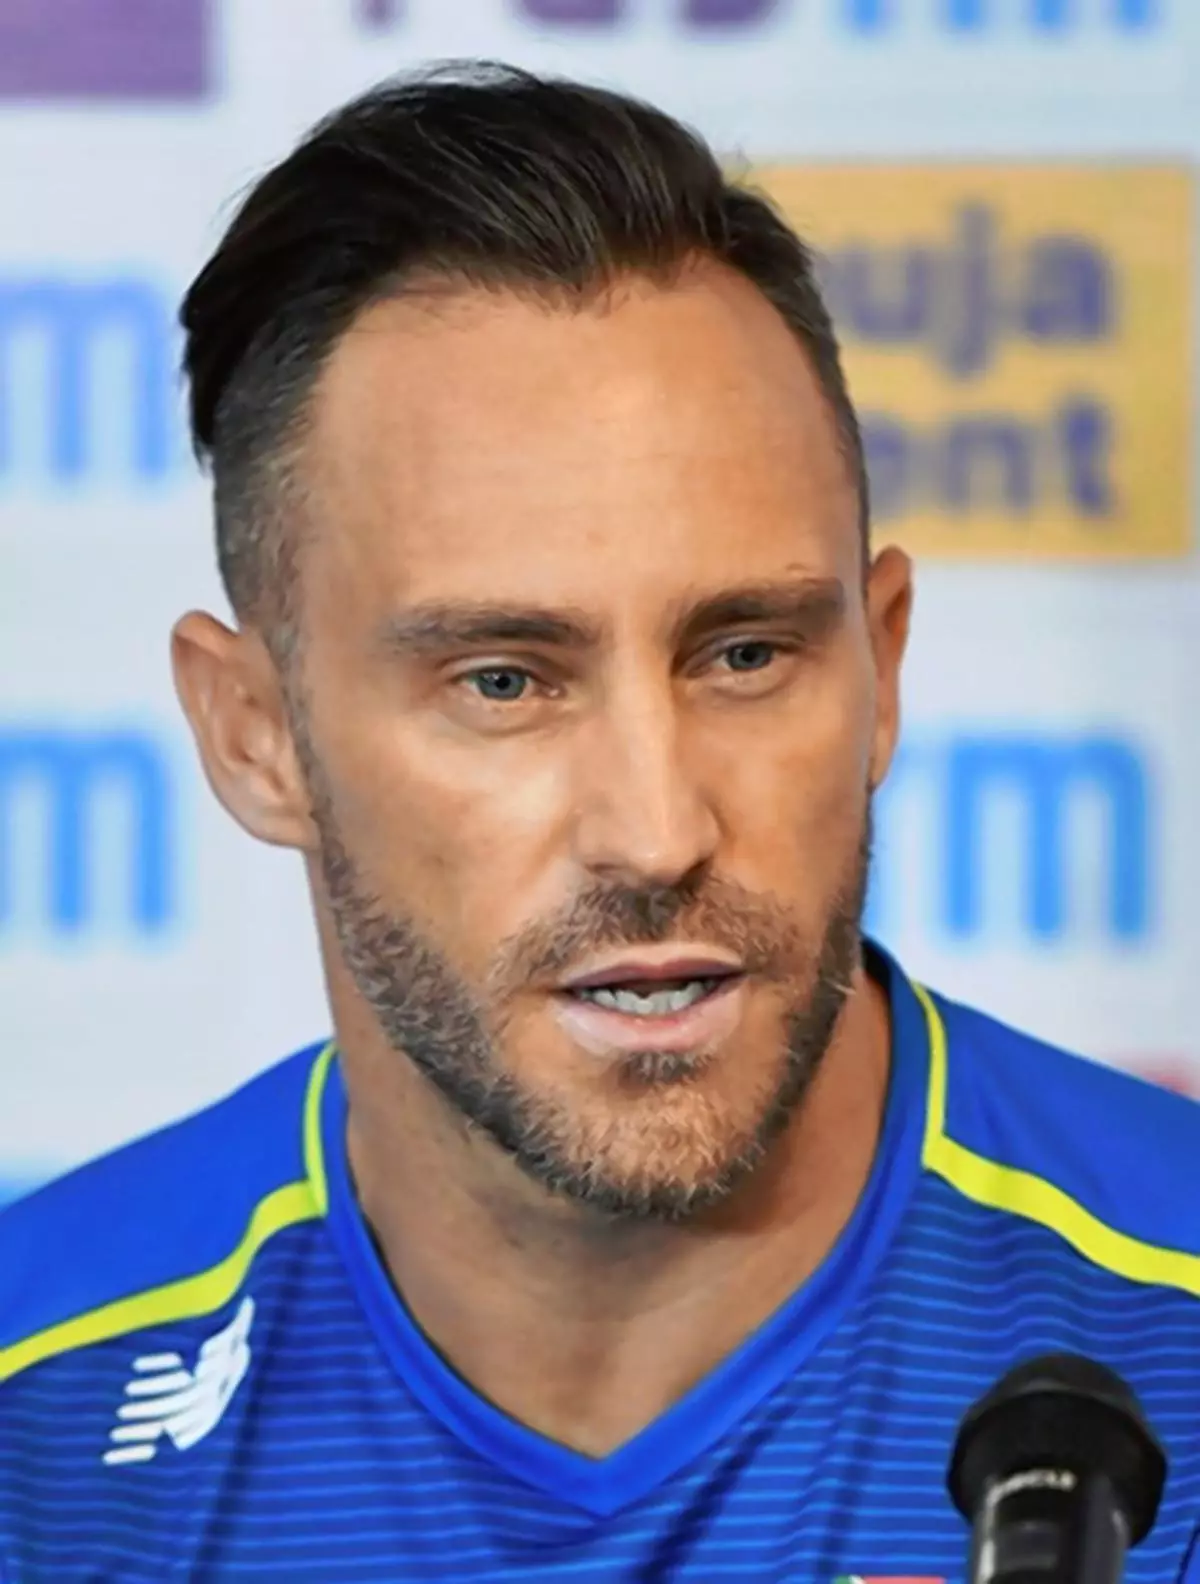 Faf du Plessis calls for tunnel vision as his side stares down series  defeat  ESPNcricinfo